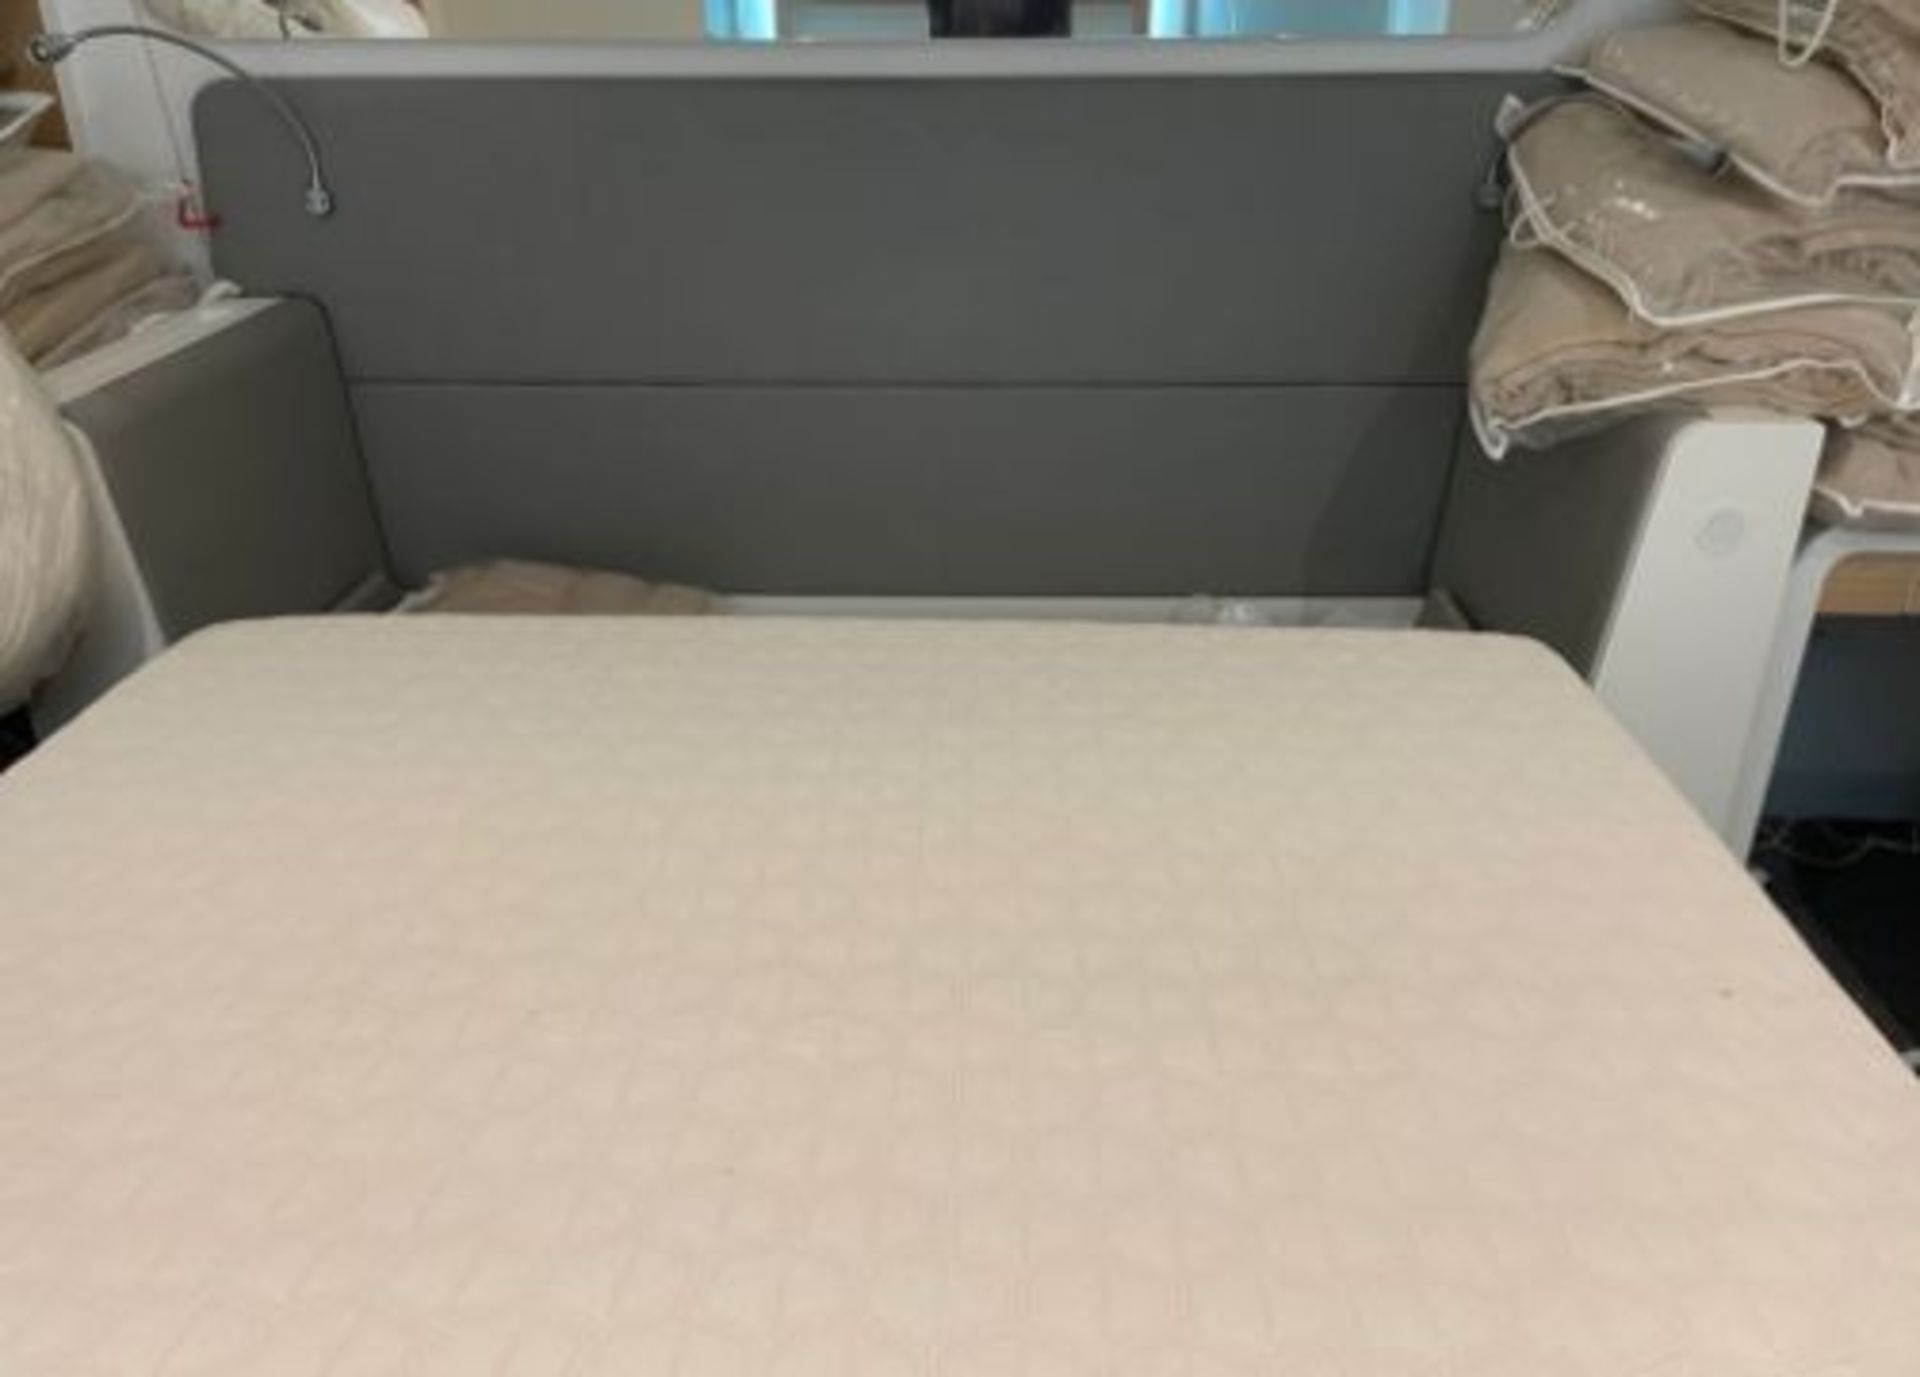 1 x Double Adjustable Space Saving Smart Bed With Serta Motion Memory Foam Mattress - Signature - Image 3 of 8